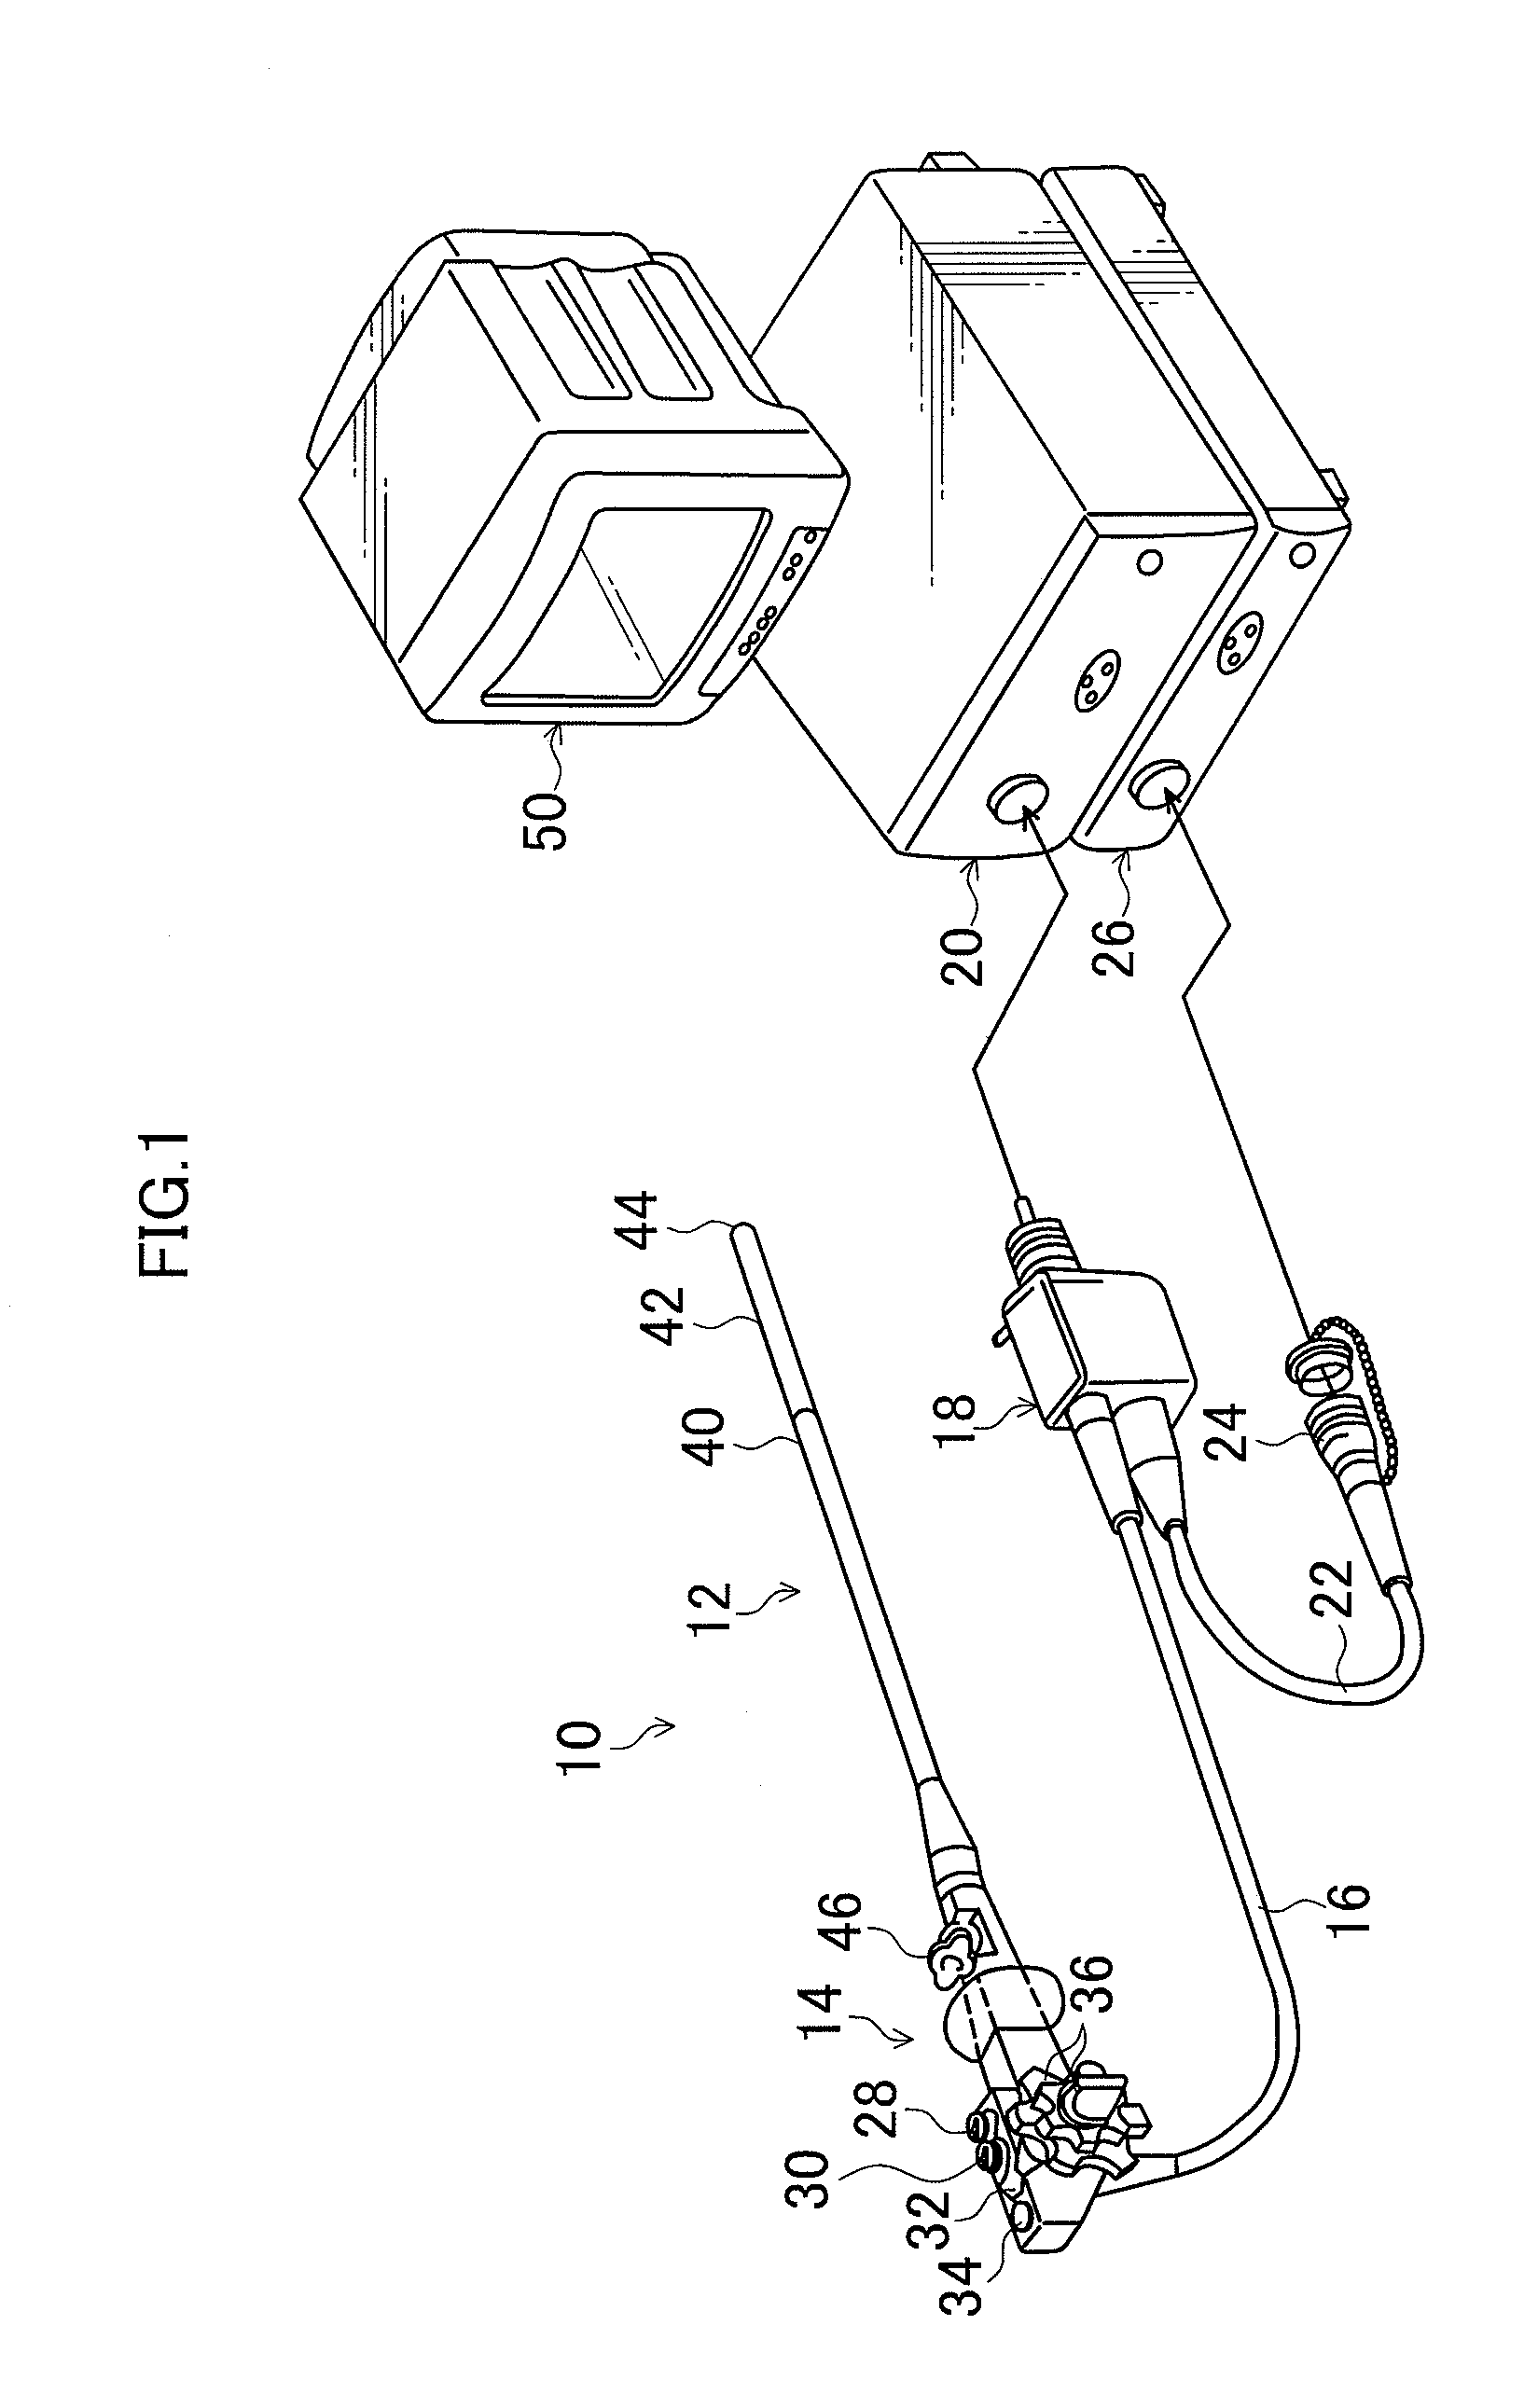 Solid-state image pickup device and endoscopic device